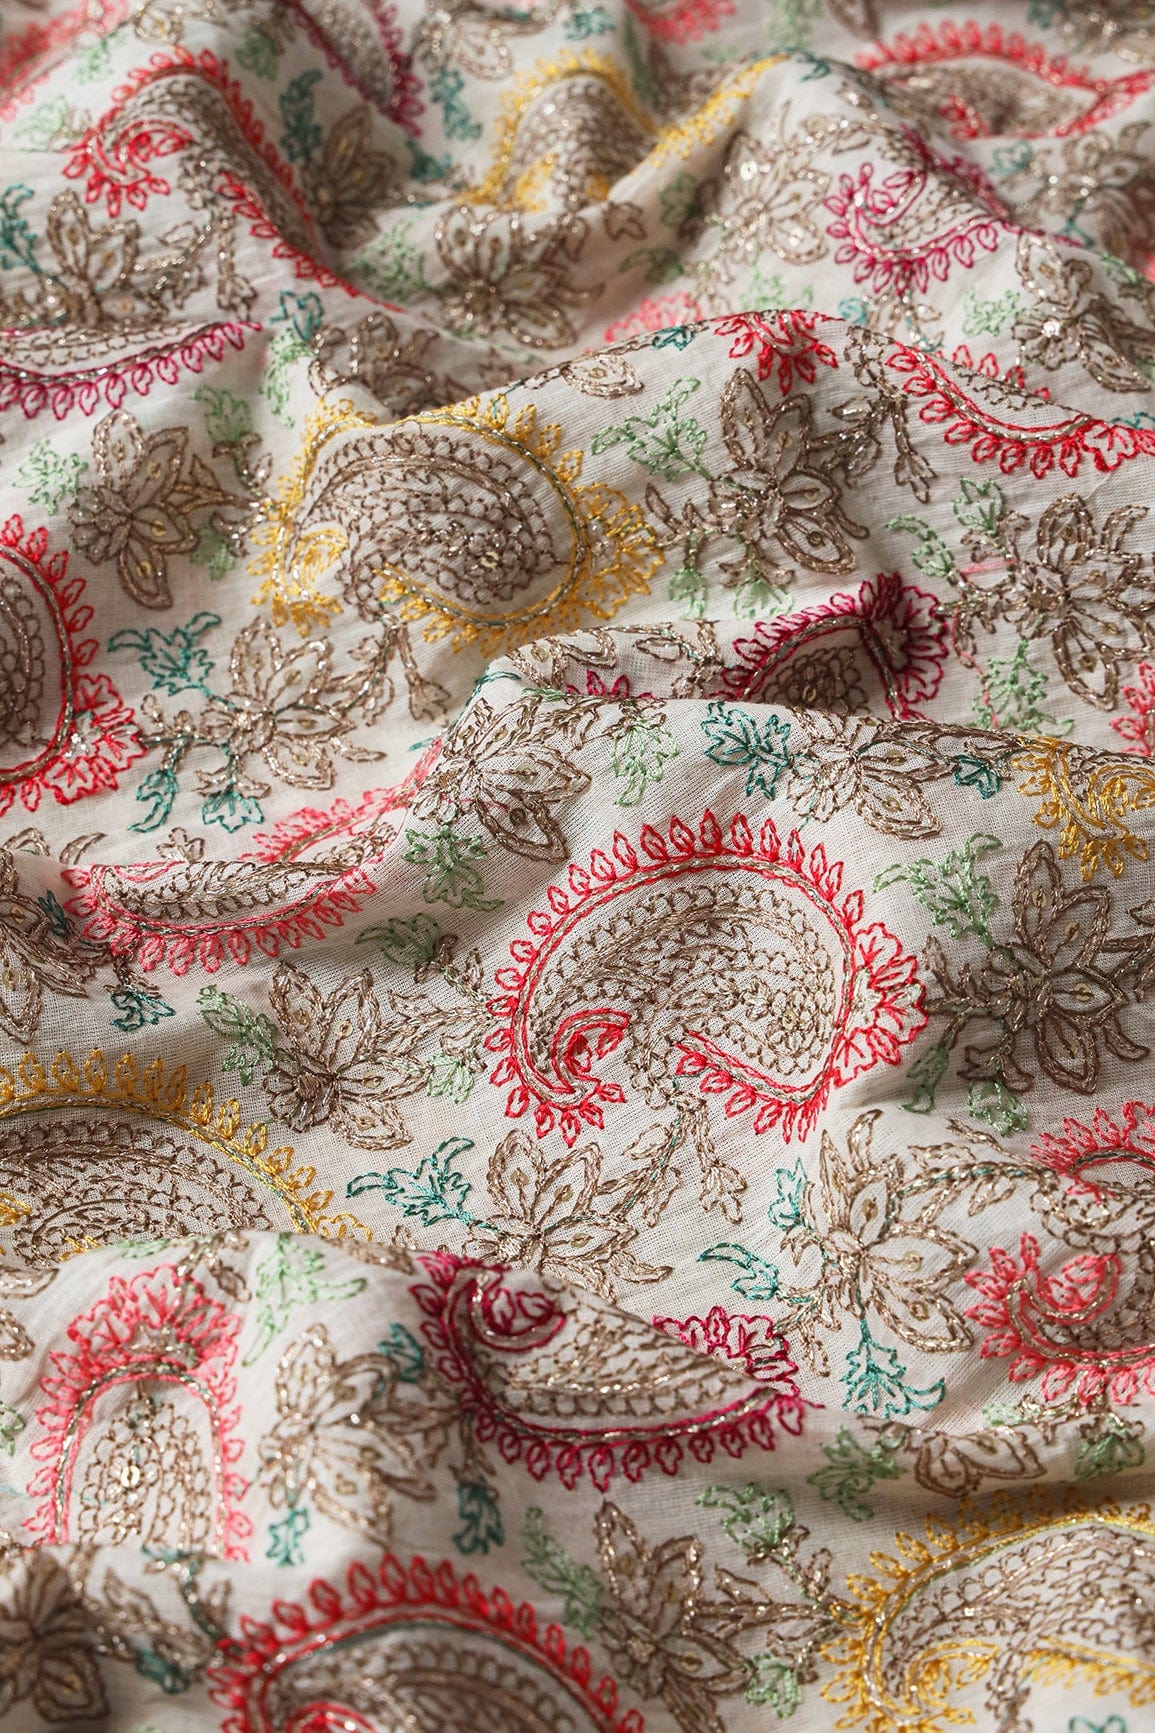 doeraa Embroidery Fabrics Multi Thread With Zari And Gold Sequins Paisley Embroidery On Off White Organic Cotton Fabric